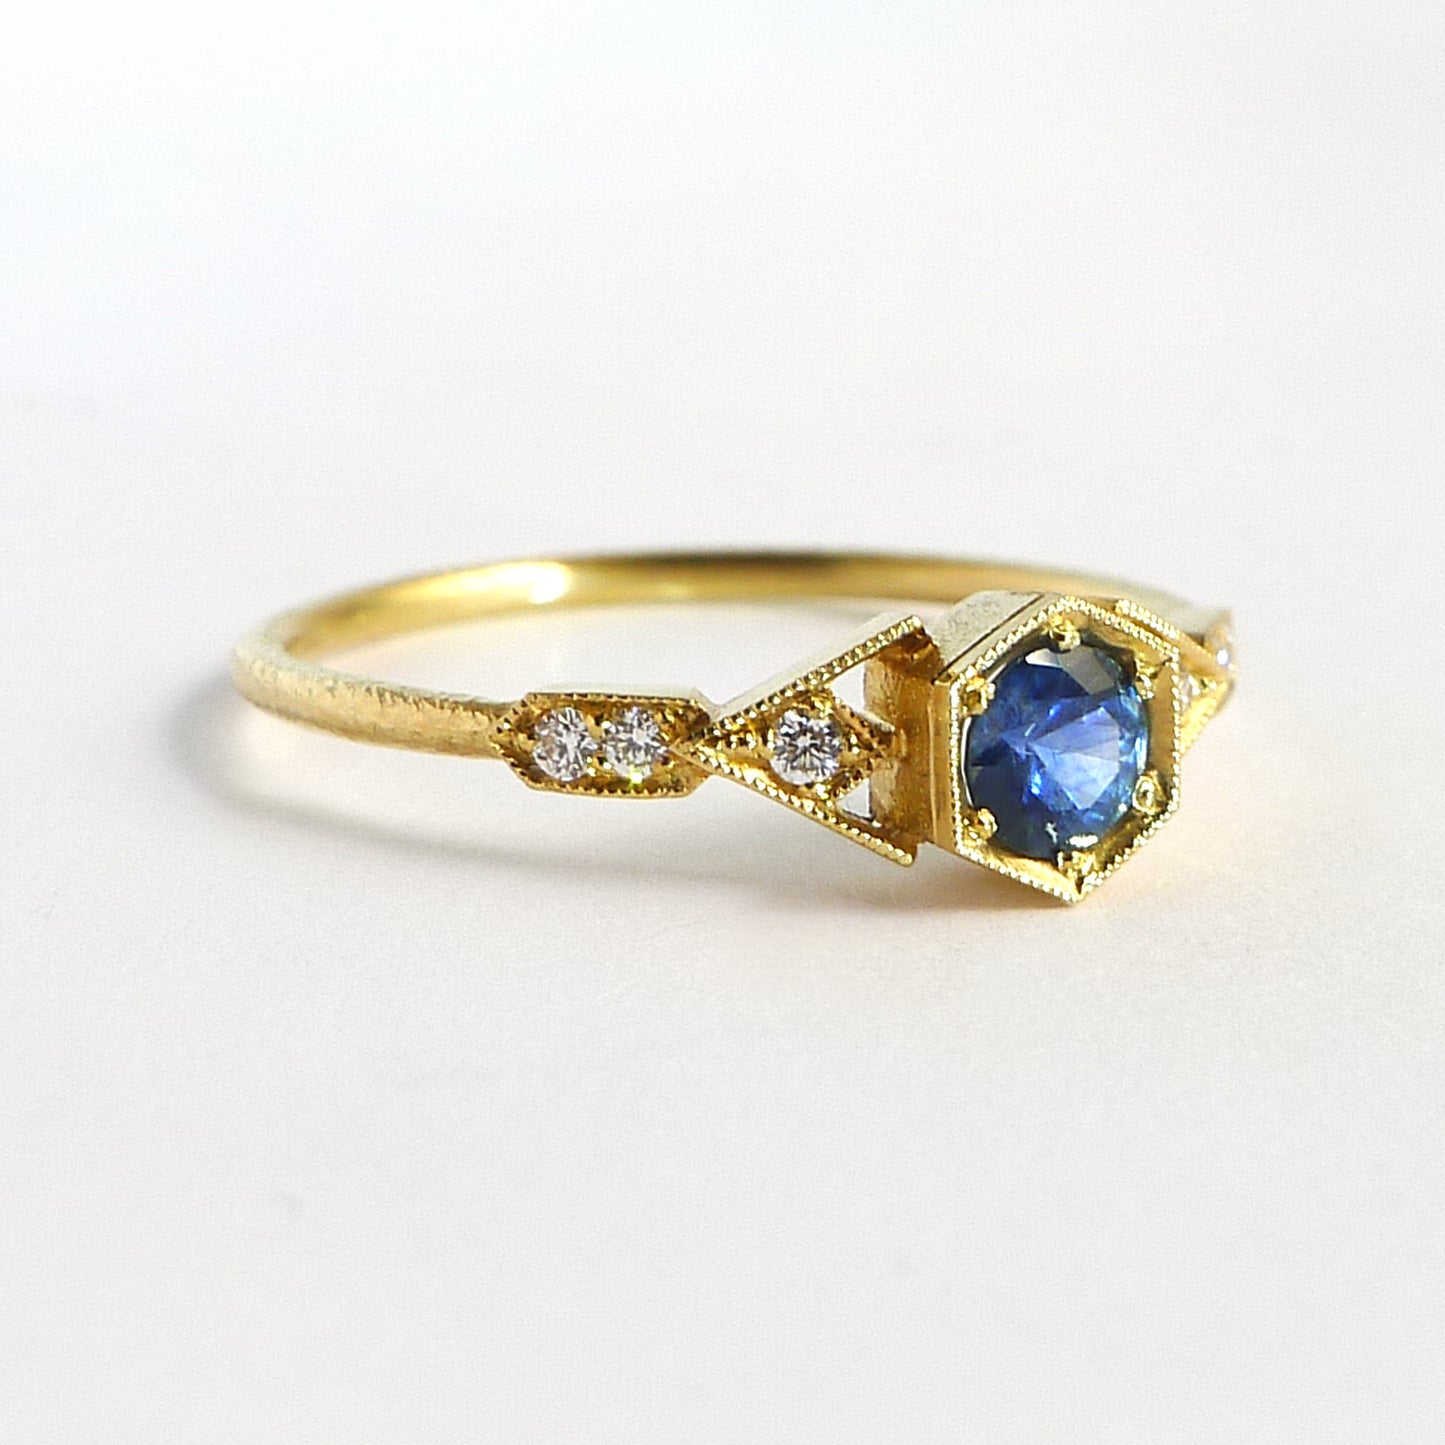 Abris Vestra Ring with Blue Sapphire